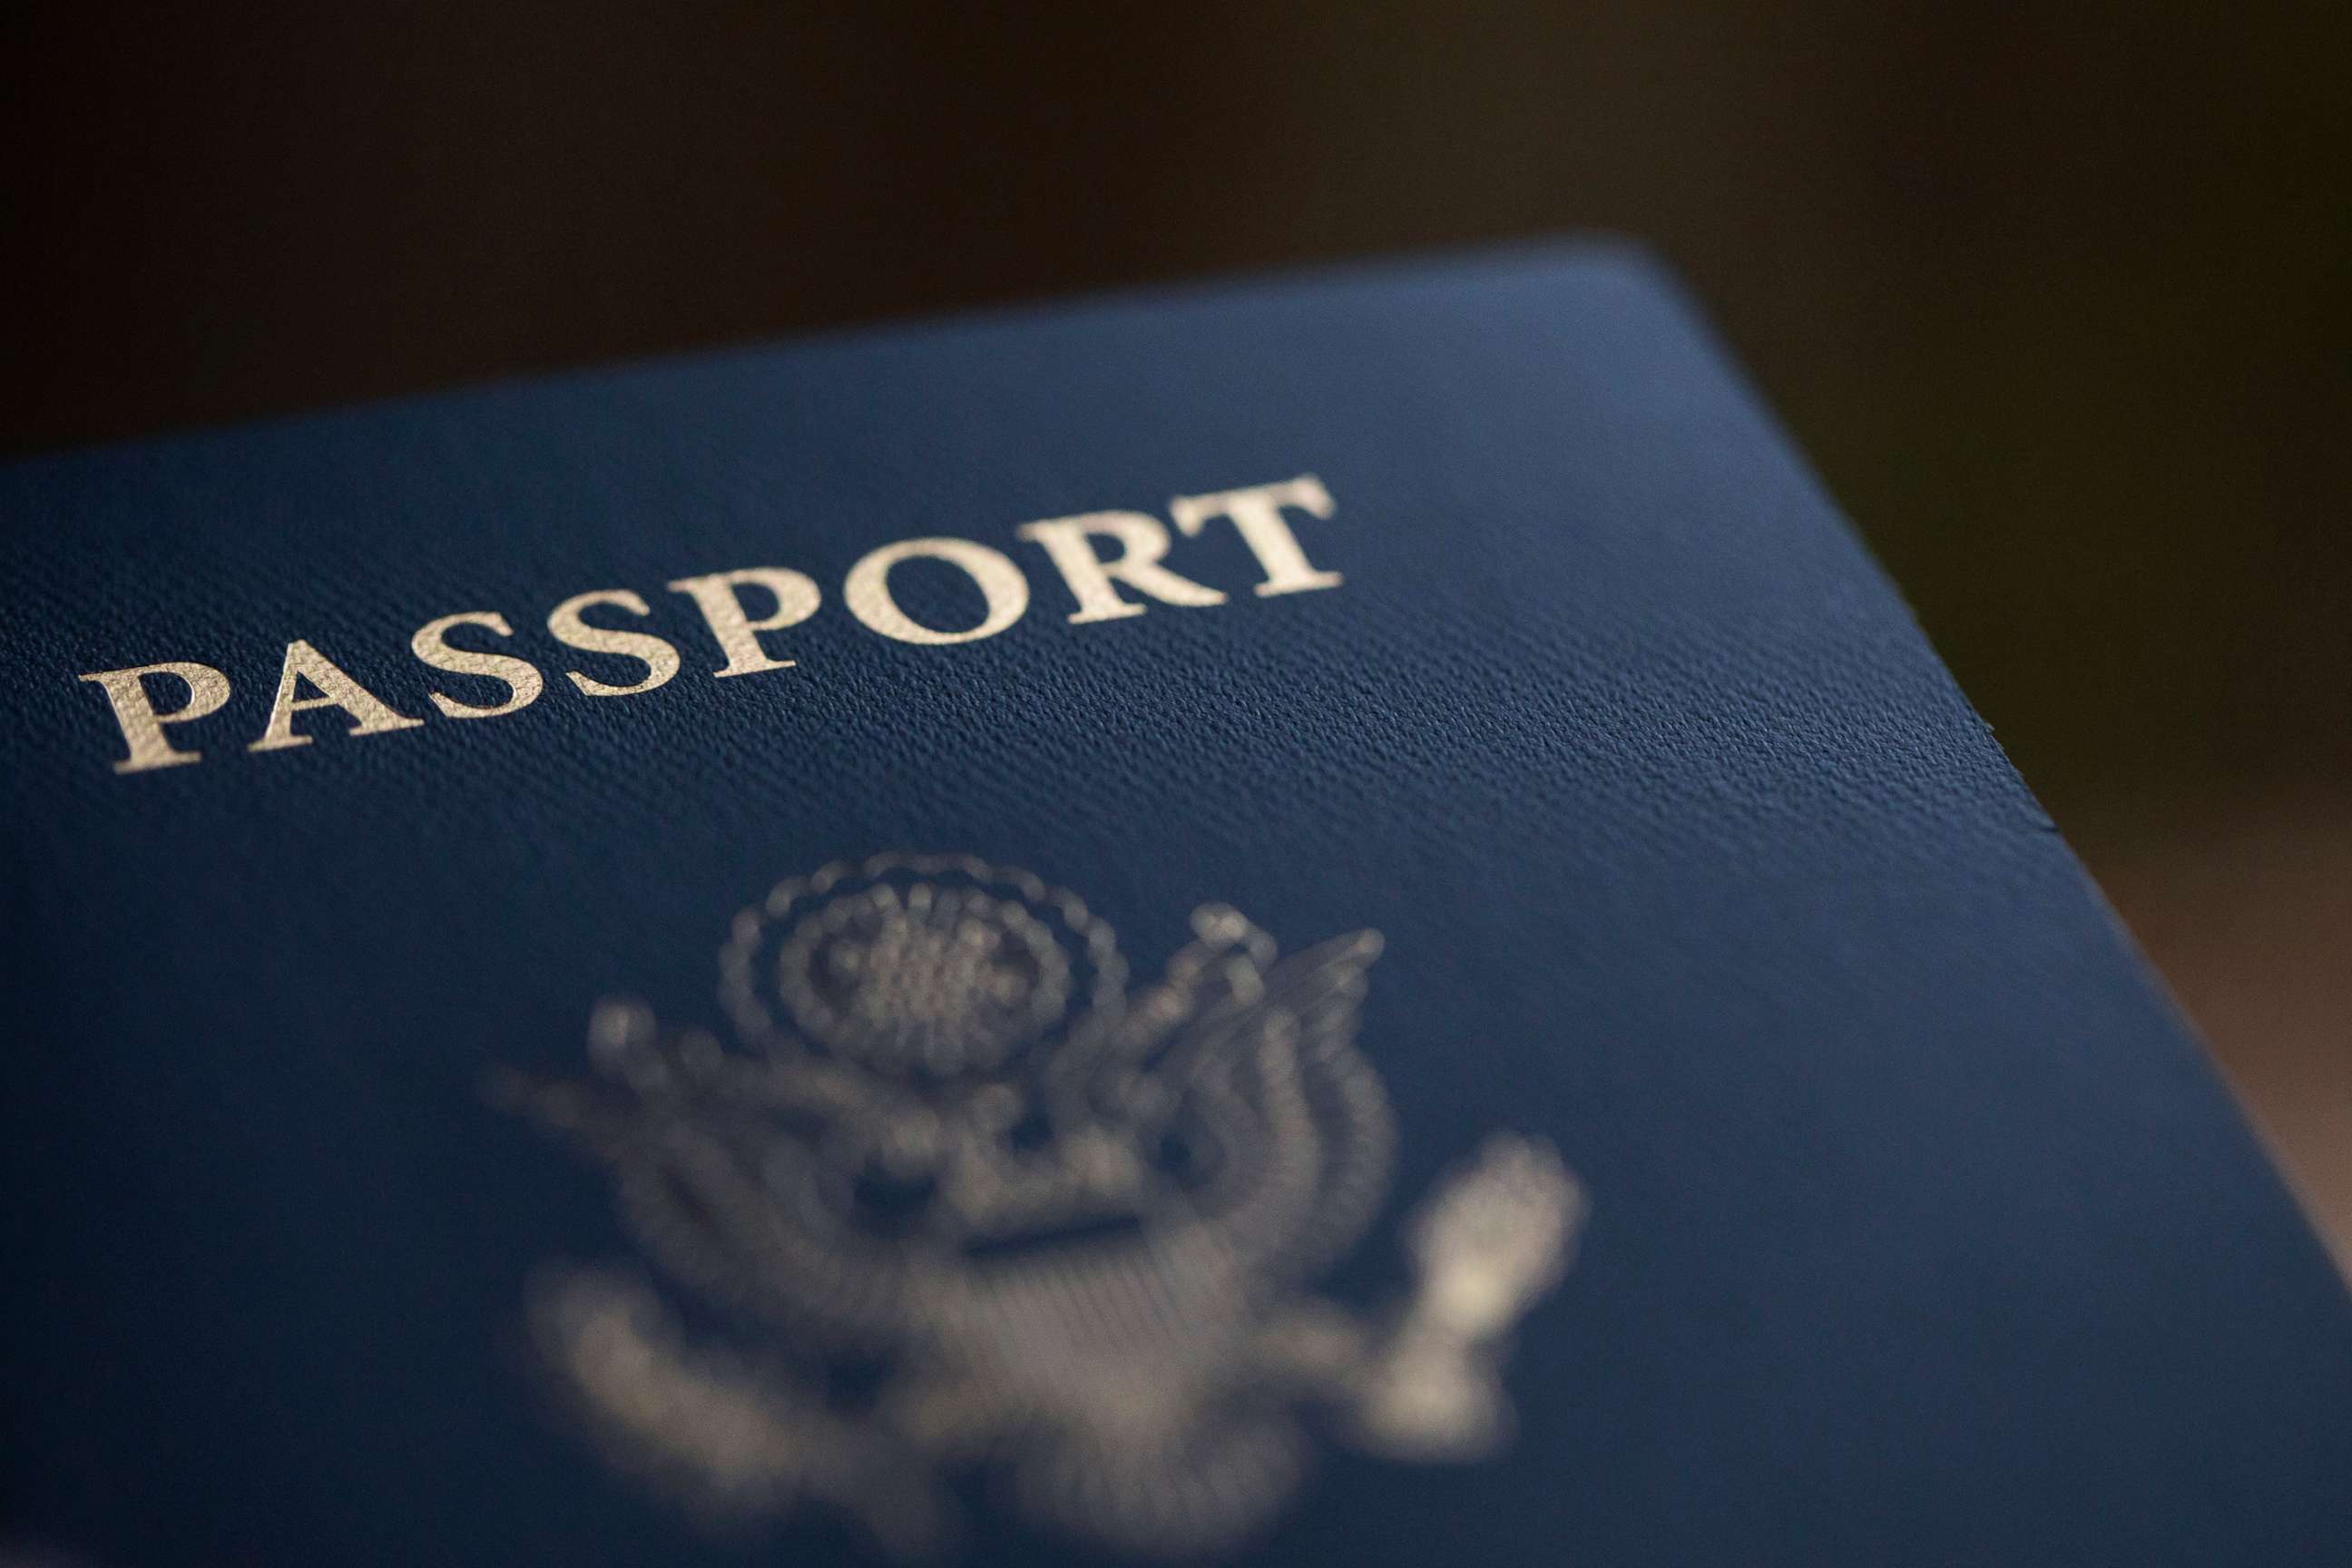 fee for renewing a passport